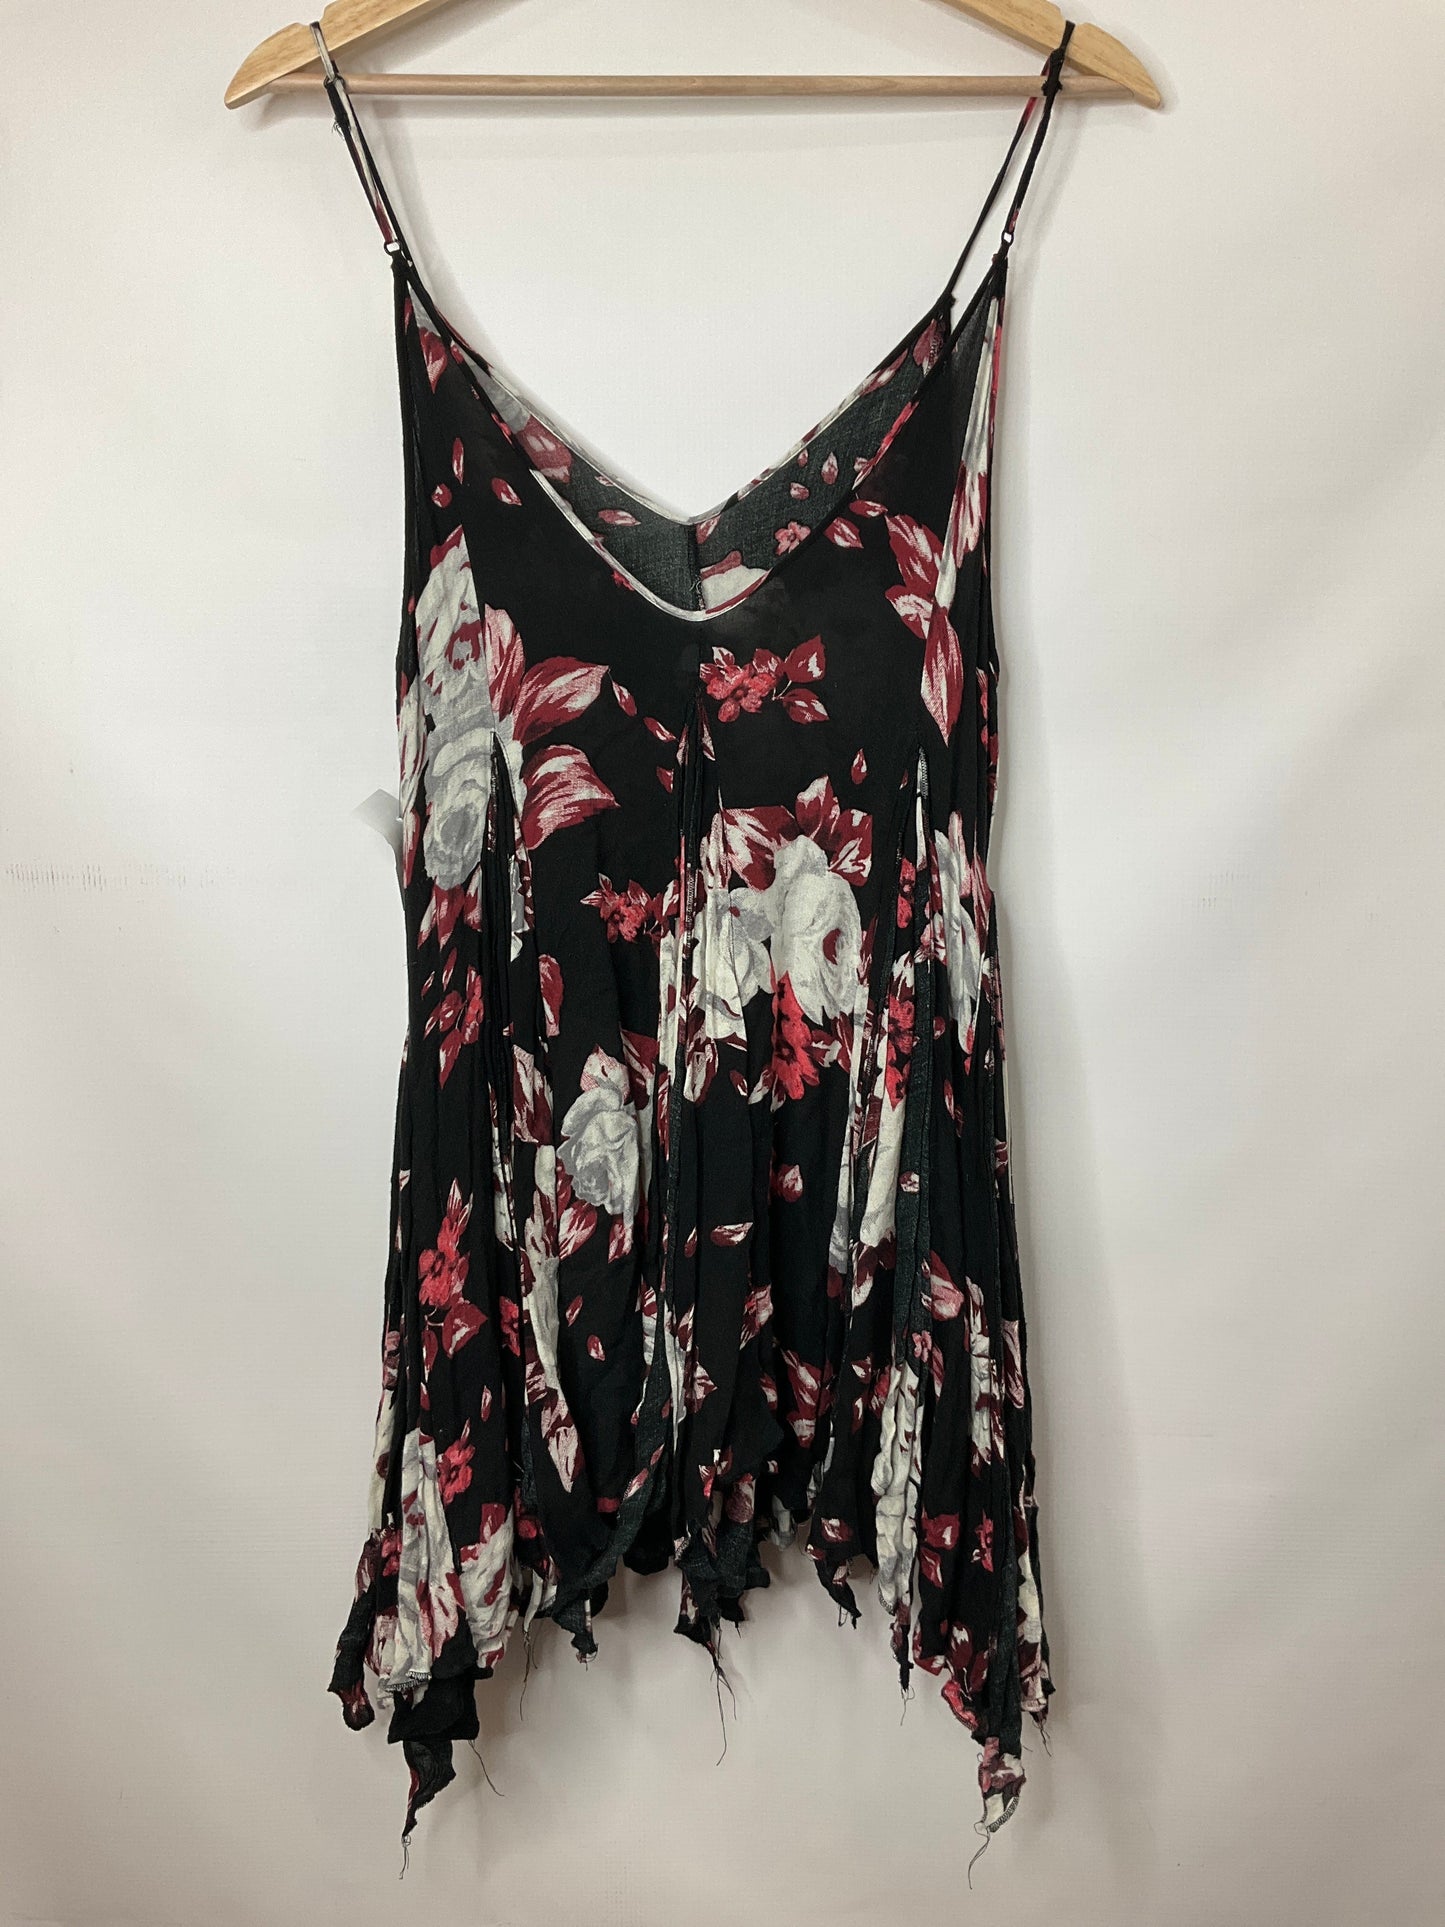 Floral Print Tunic Sleeveless Free People, Size S